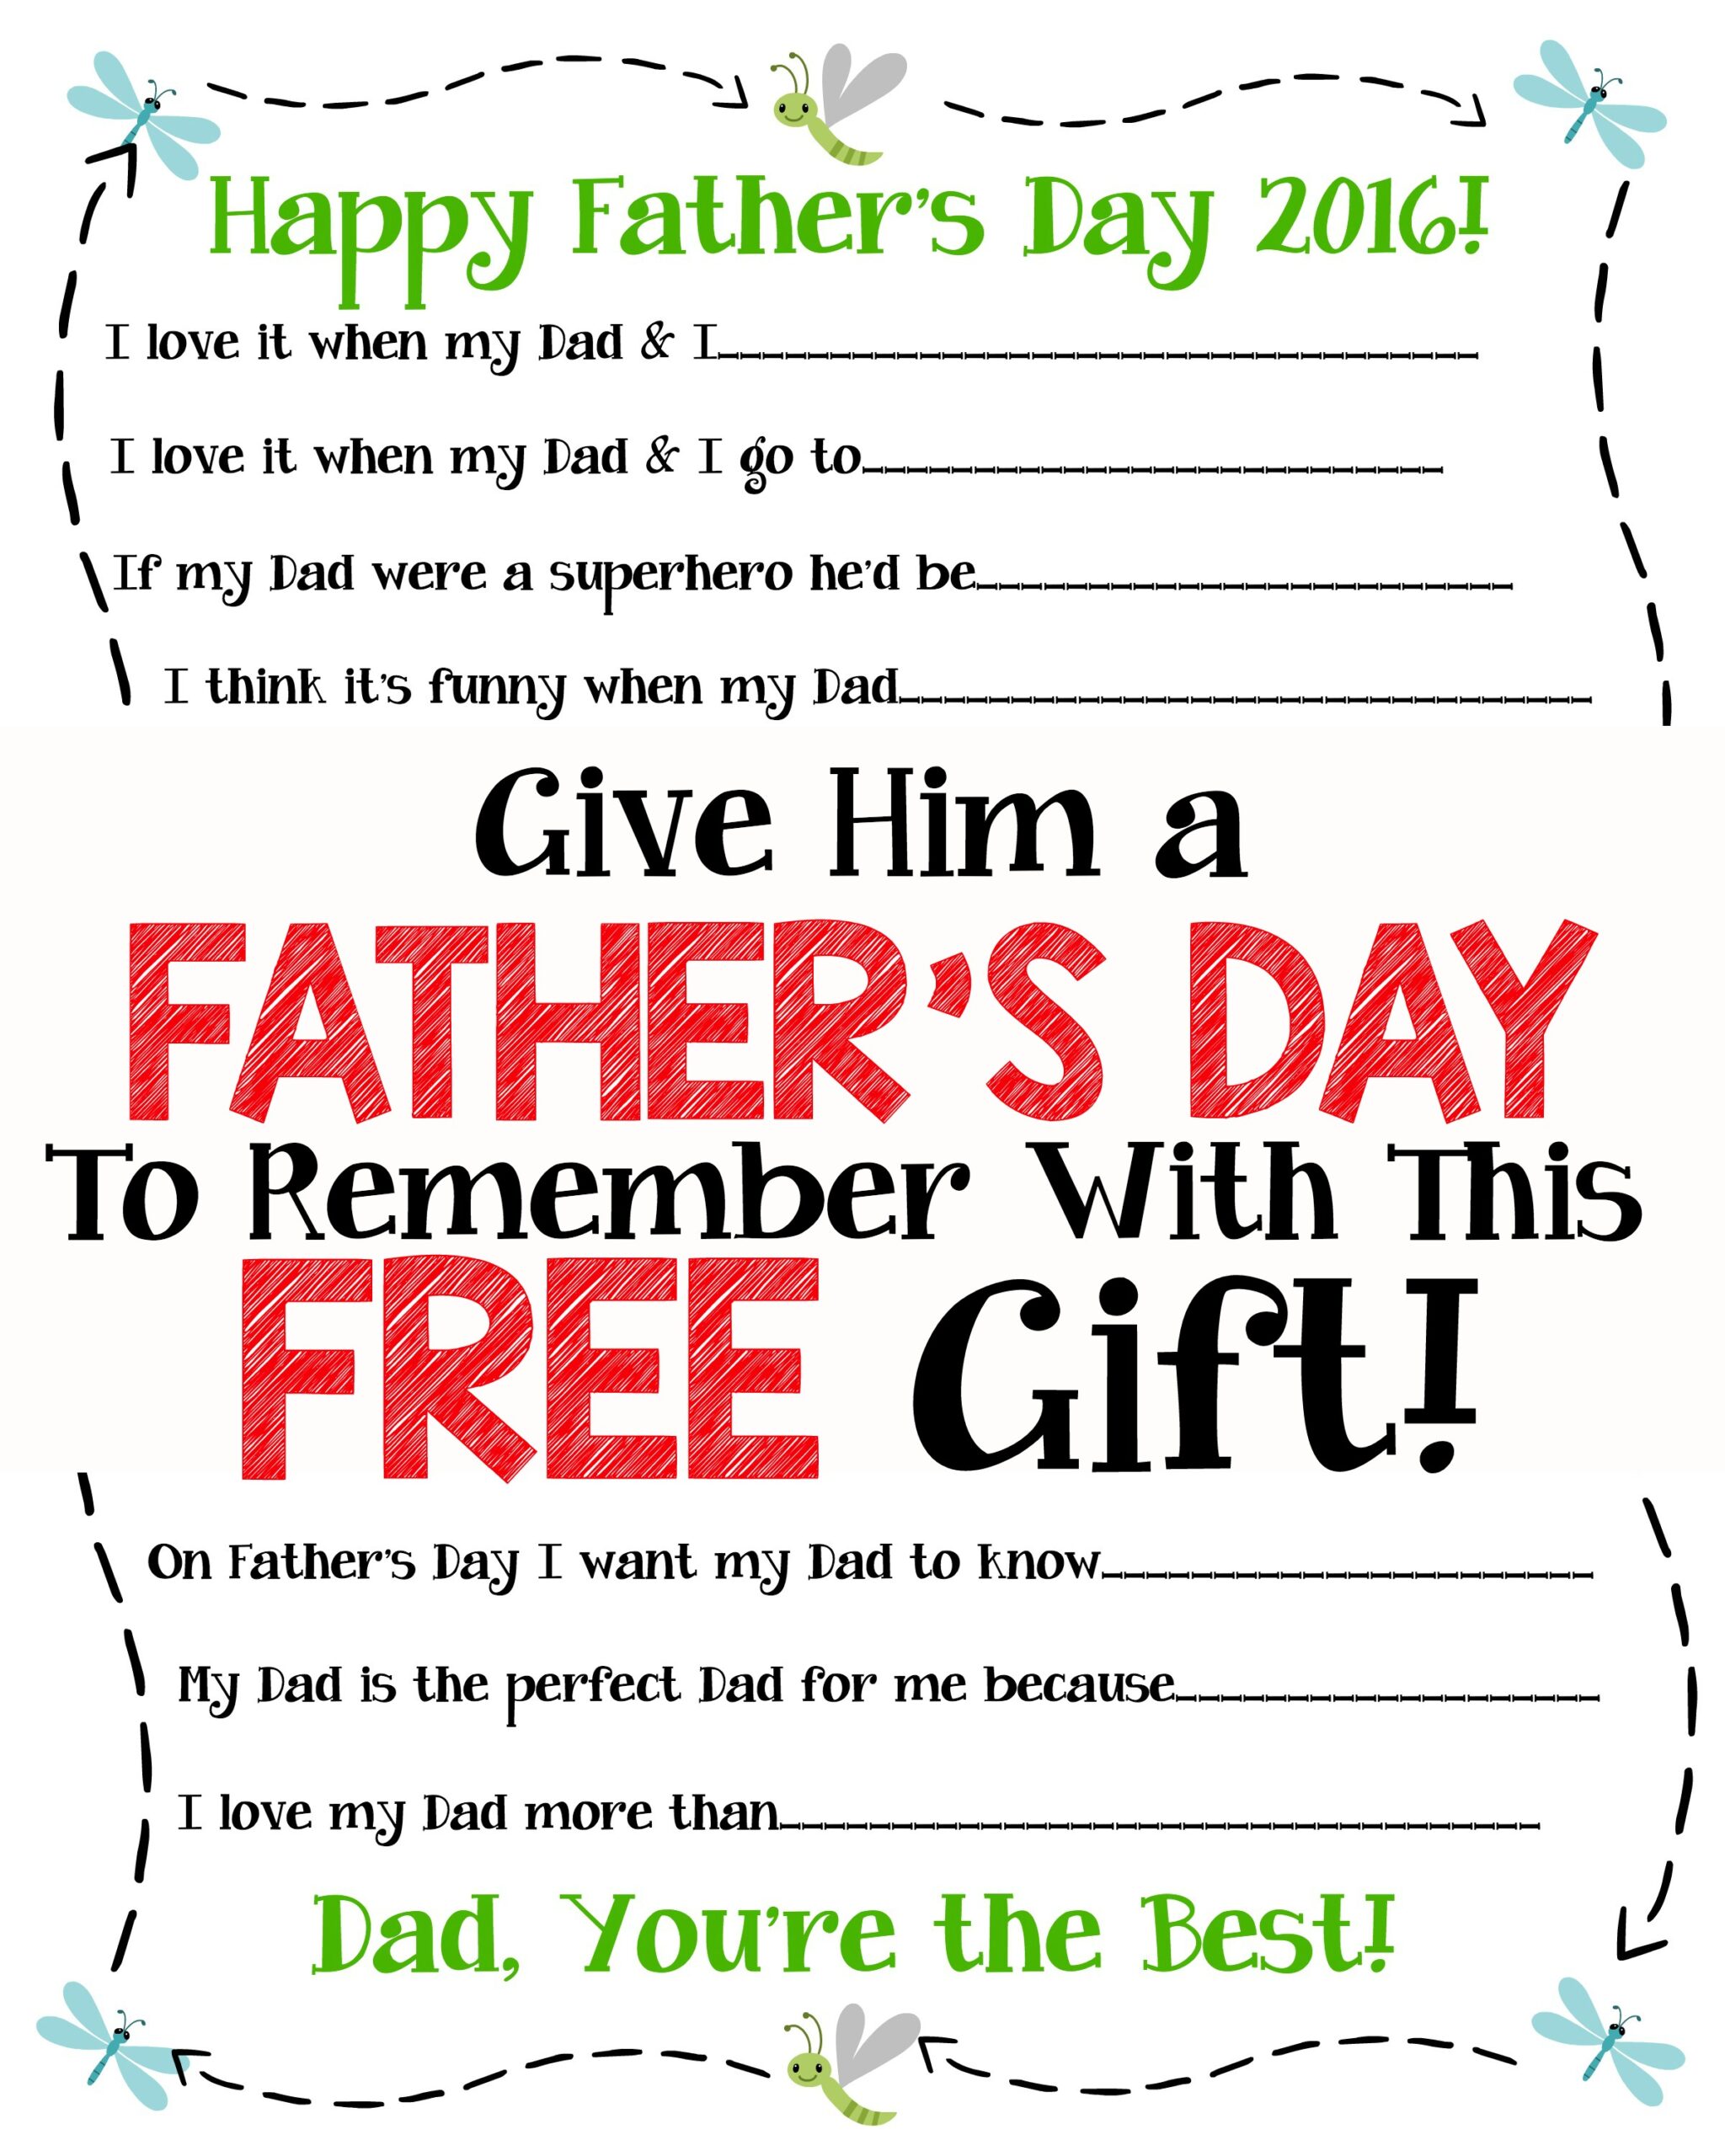 Give Him a Father’s Day to Remember With This FREE Gift!